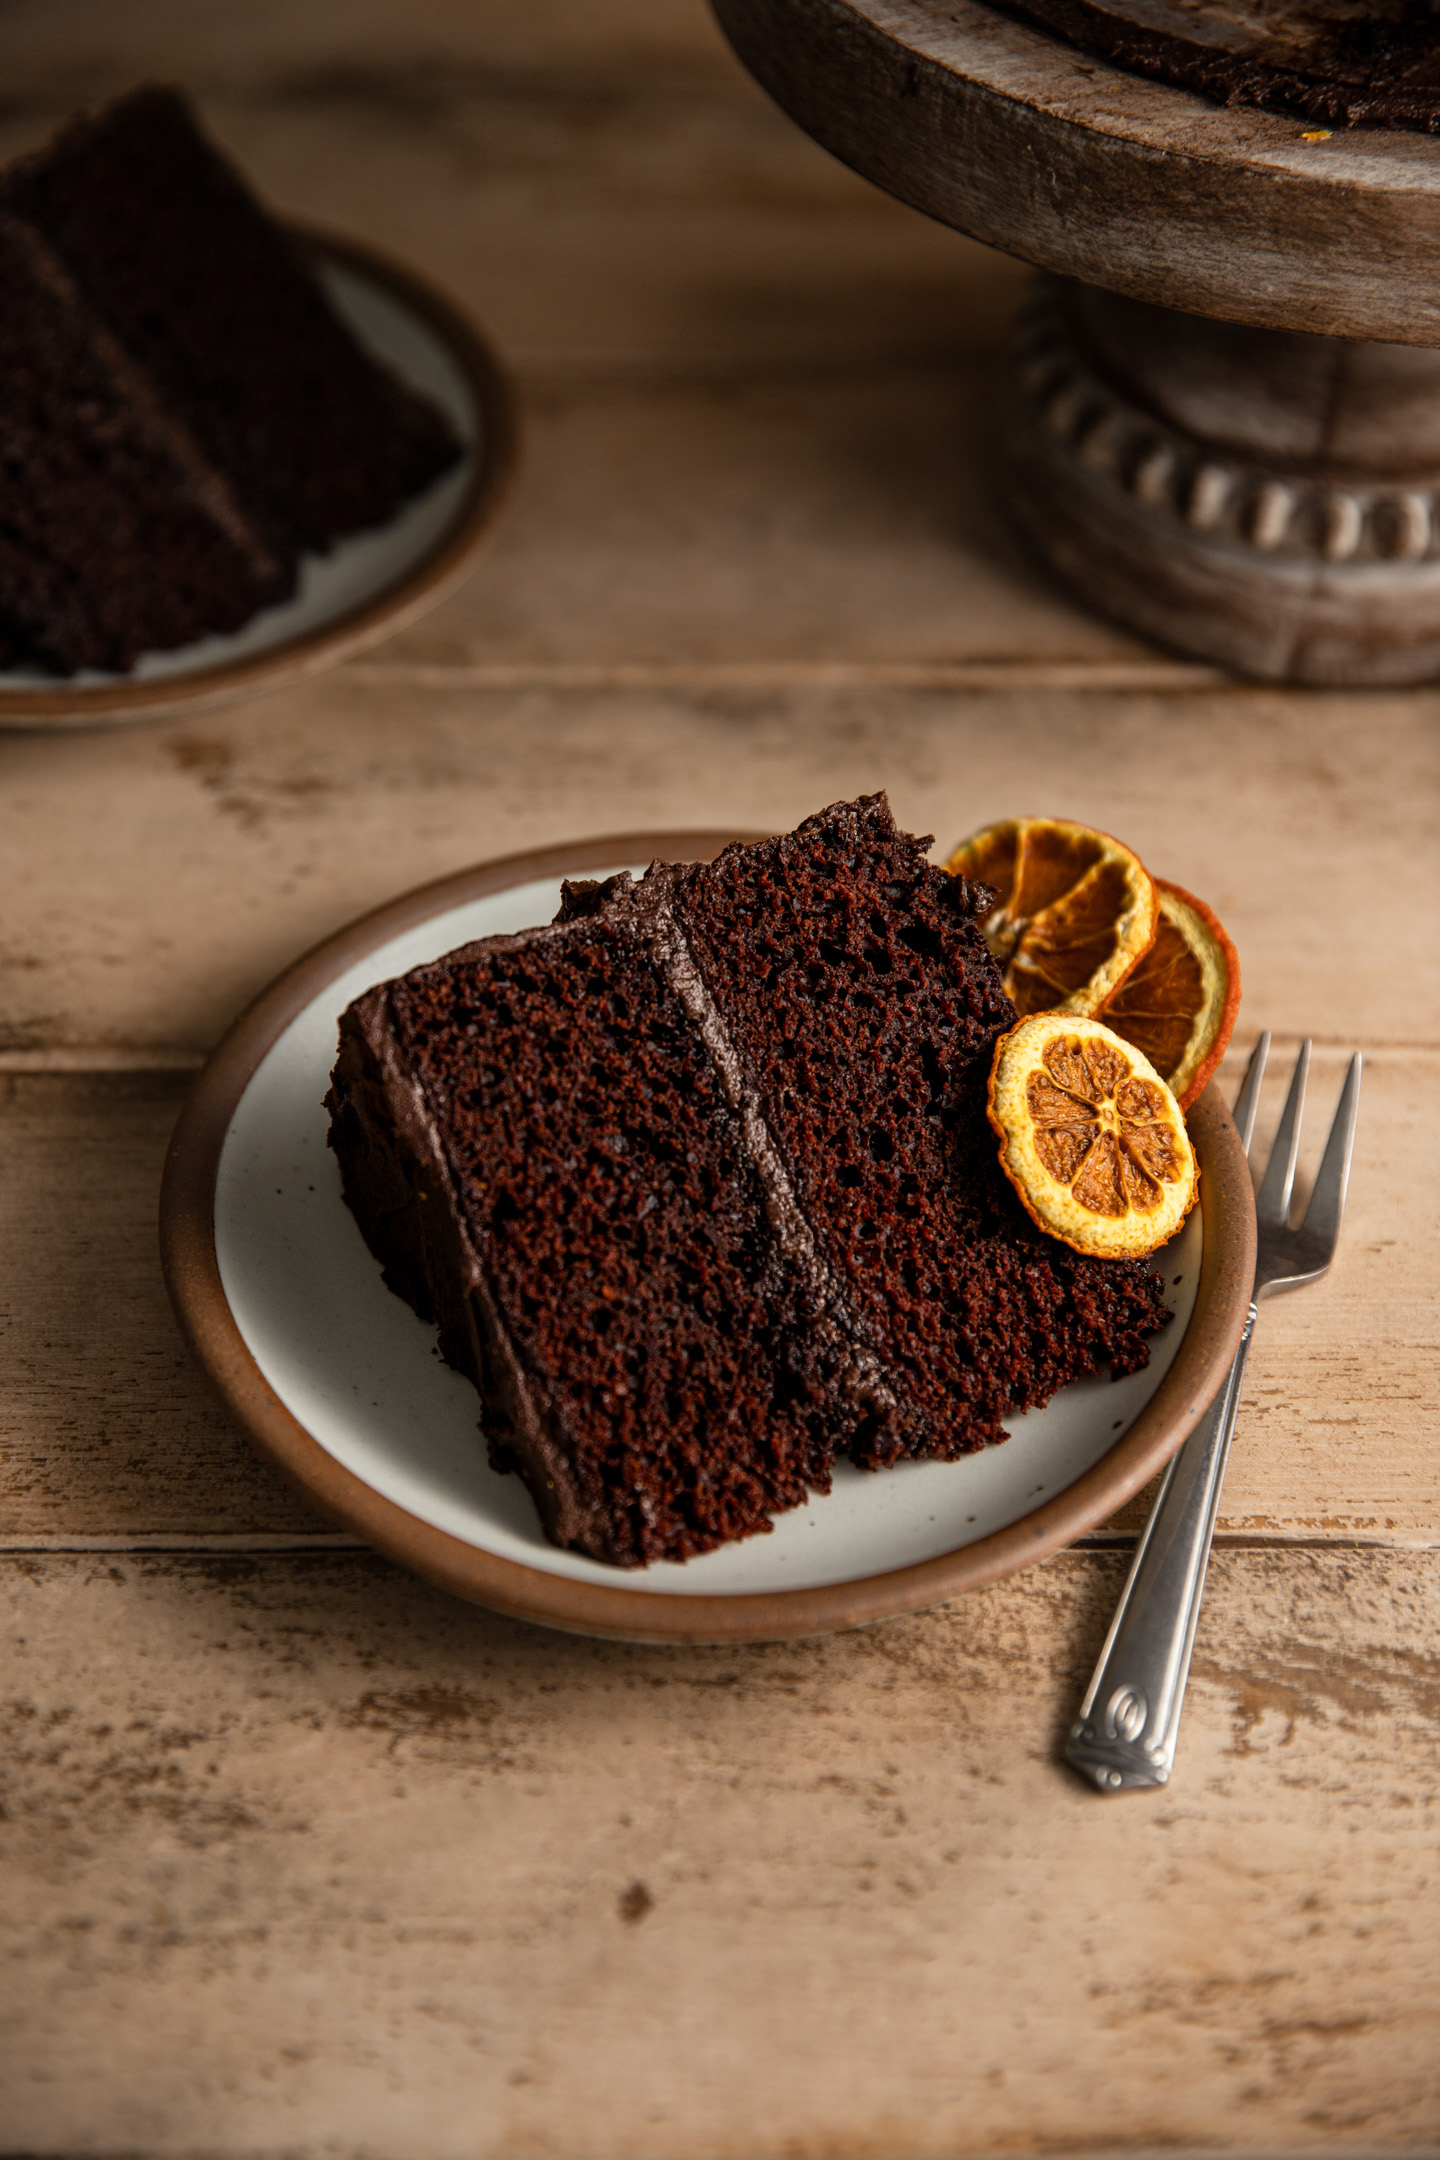 A slice of chocolate cake with dried orange slices next to it.